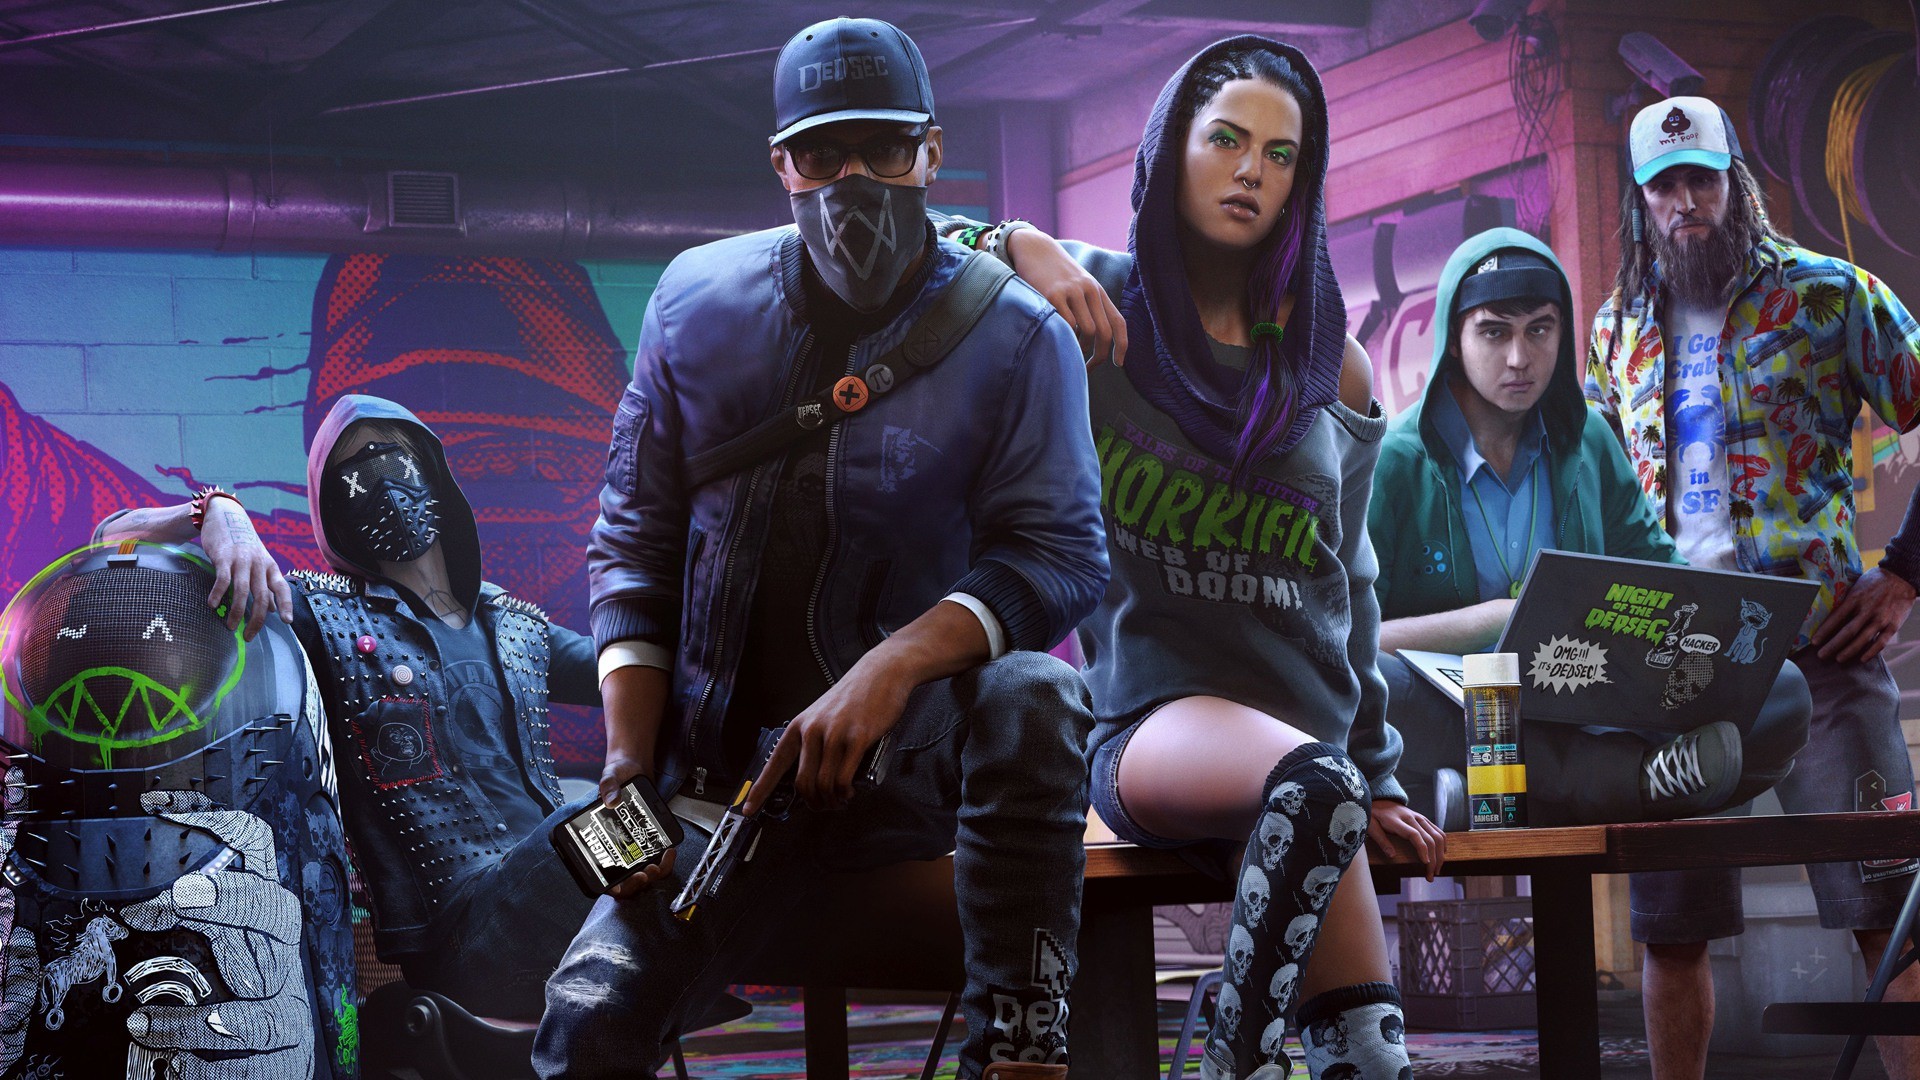 Watch Dogs 2 Improves Upon The Original In Every Way Including More Thoughtful Game Design Better Written Characters And A Much More Interesting Plot 1920x1080